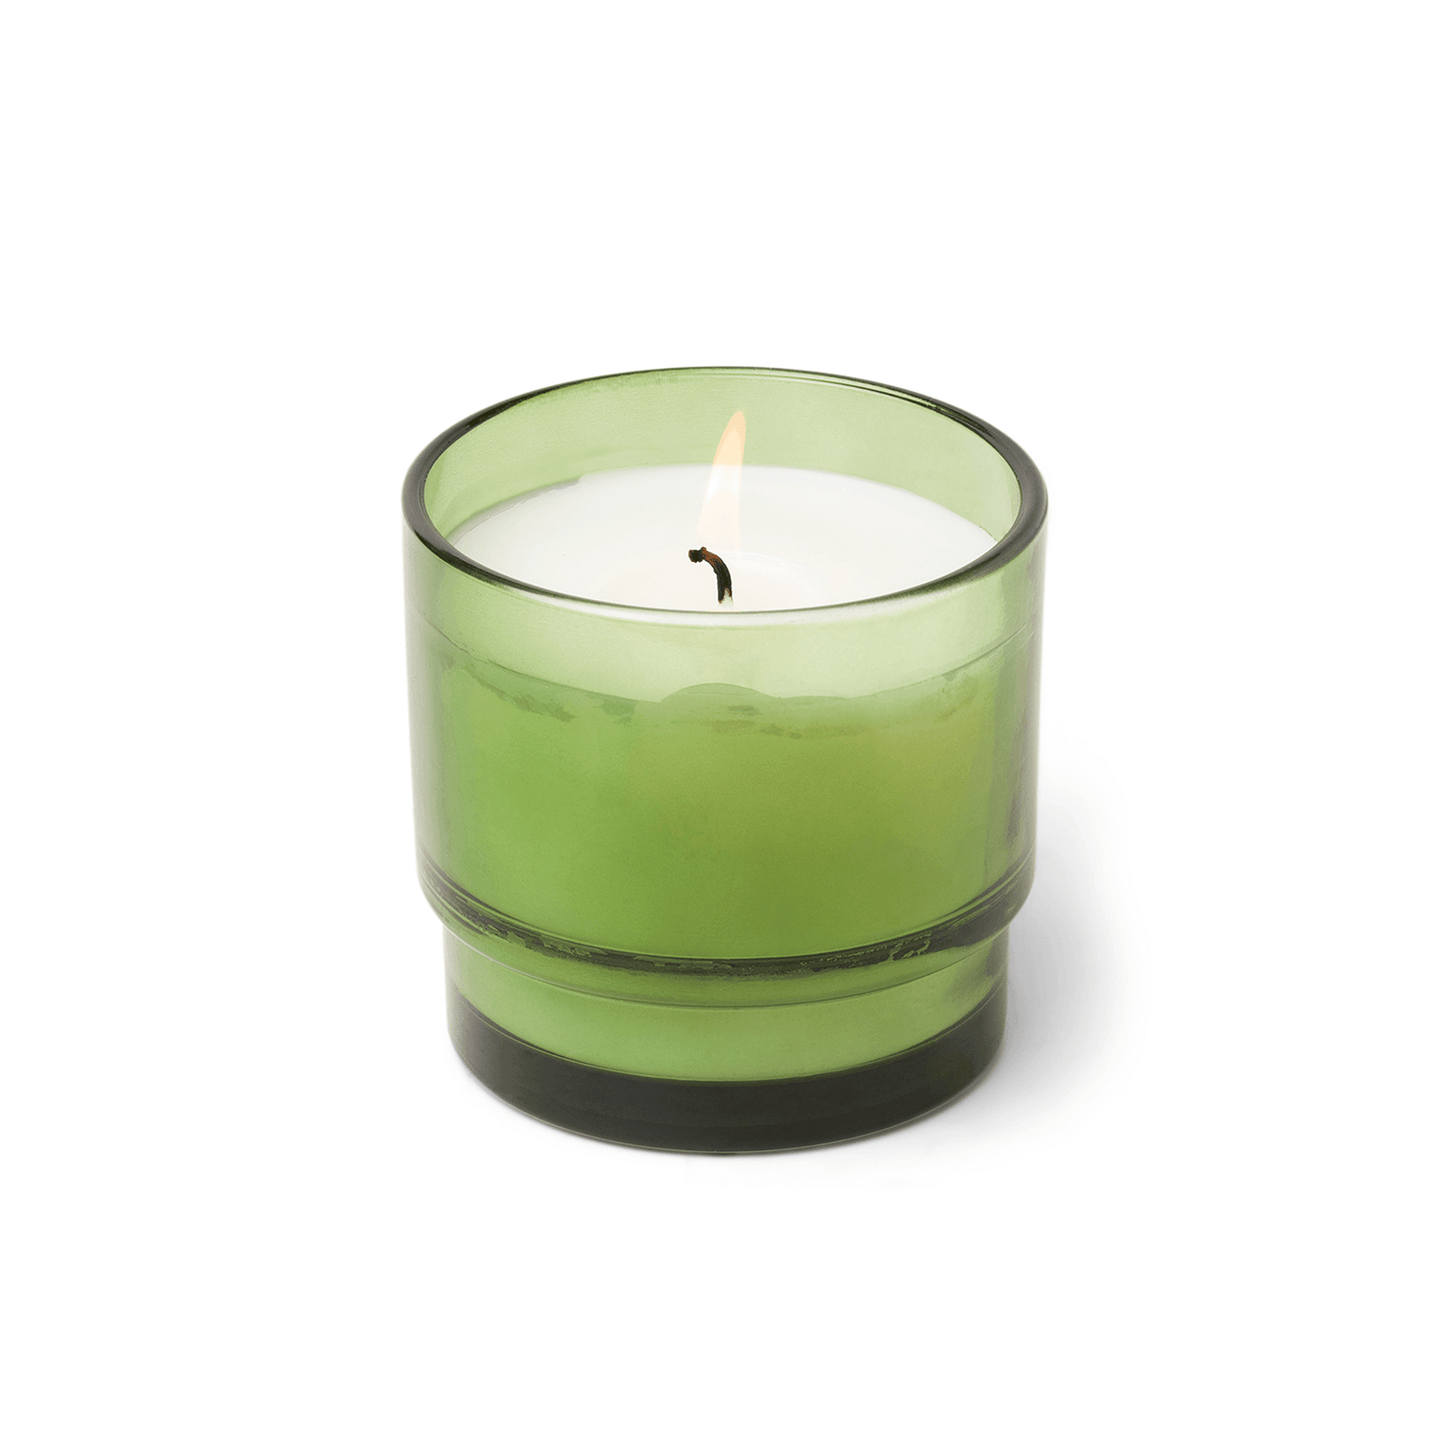 7 oz candle in glass vessel tinted green; white wax; one wick; a part of the Al Fresco collection